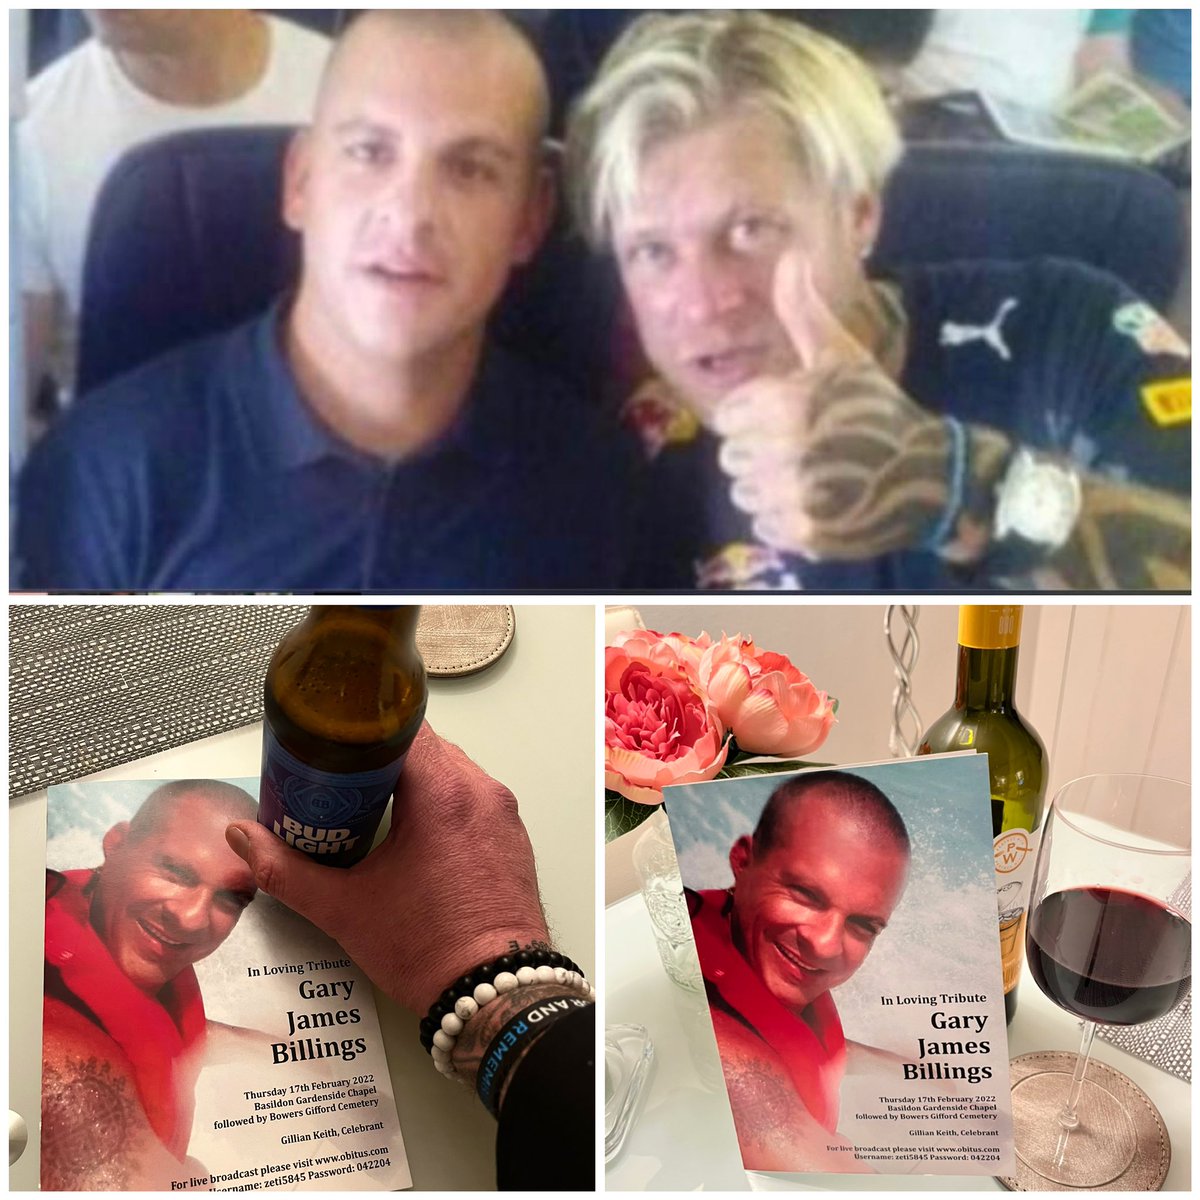 A 9 hour round trip & now I can finally raise a glass for you Billings🍷🍻👌 Beautiful service👌 Very emotional, great memories & you were one of a kind👌 Now go fly your wings Gary Billings 💙🍻👌 #RIPBillings #TopBloke #Friend #OneOfAkind #ibiza2016 #Football @_DeclanRice